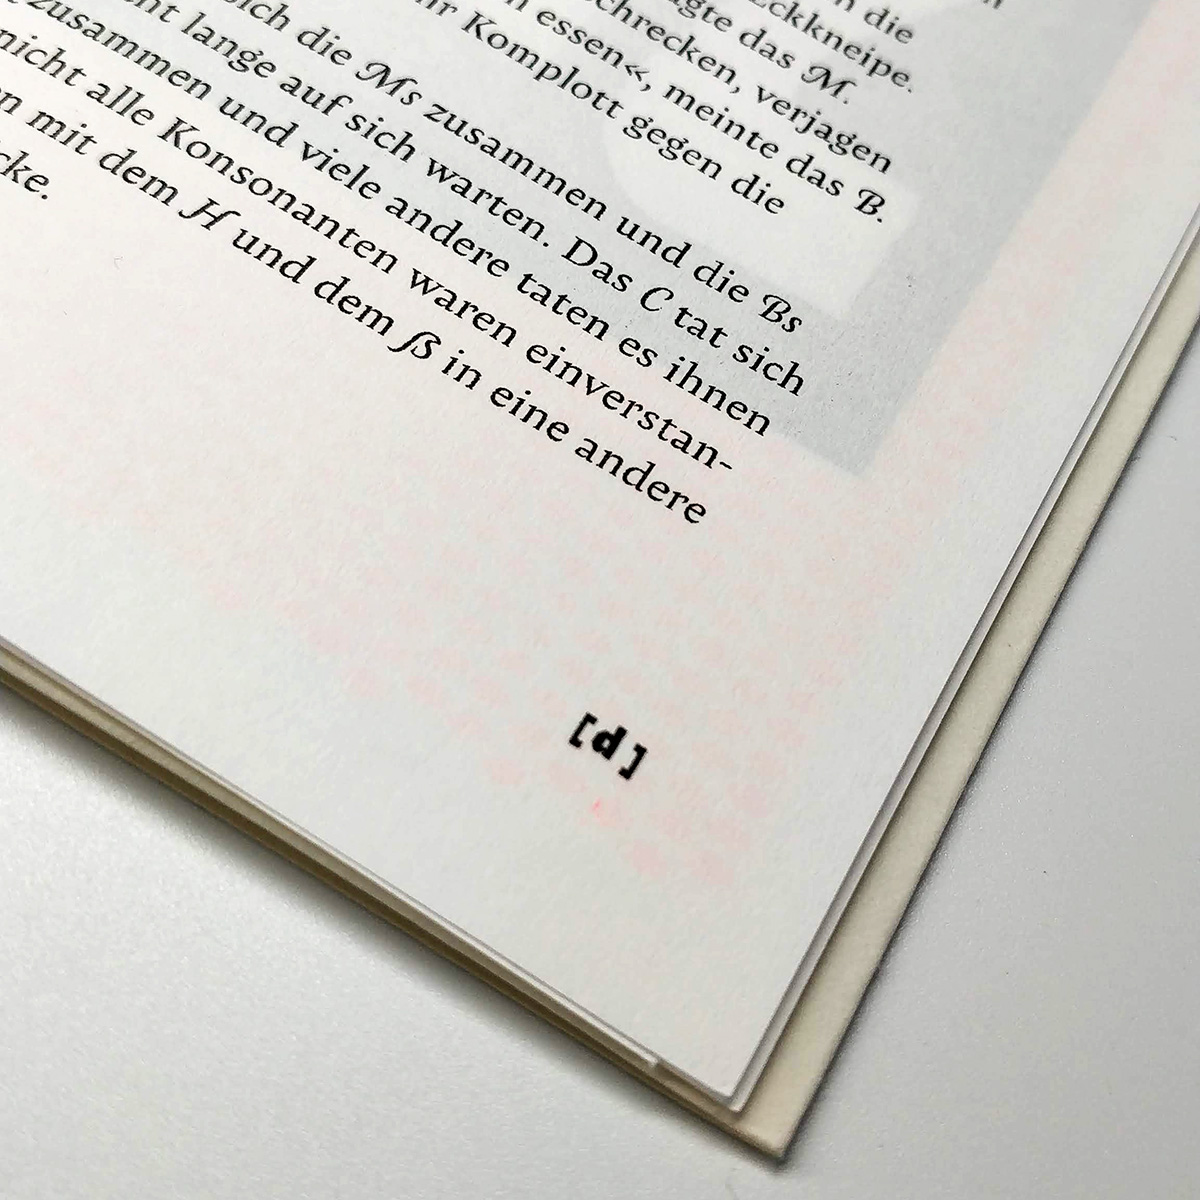 NMTK zine, issue B, “Das/The/El K/Complot/t” - Fonts In Use